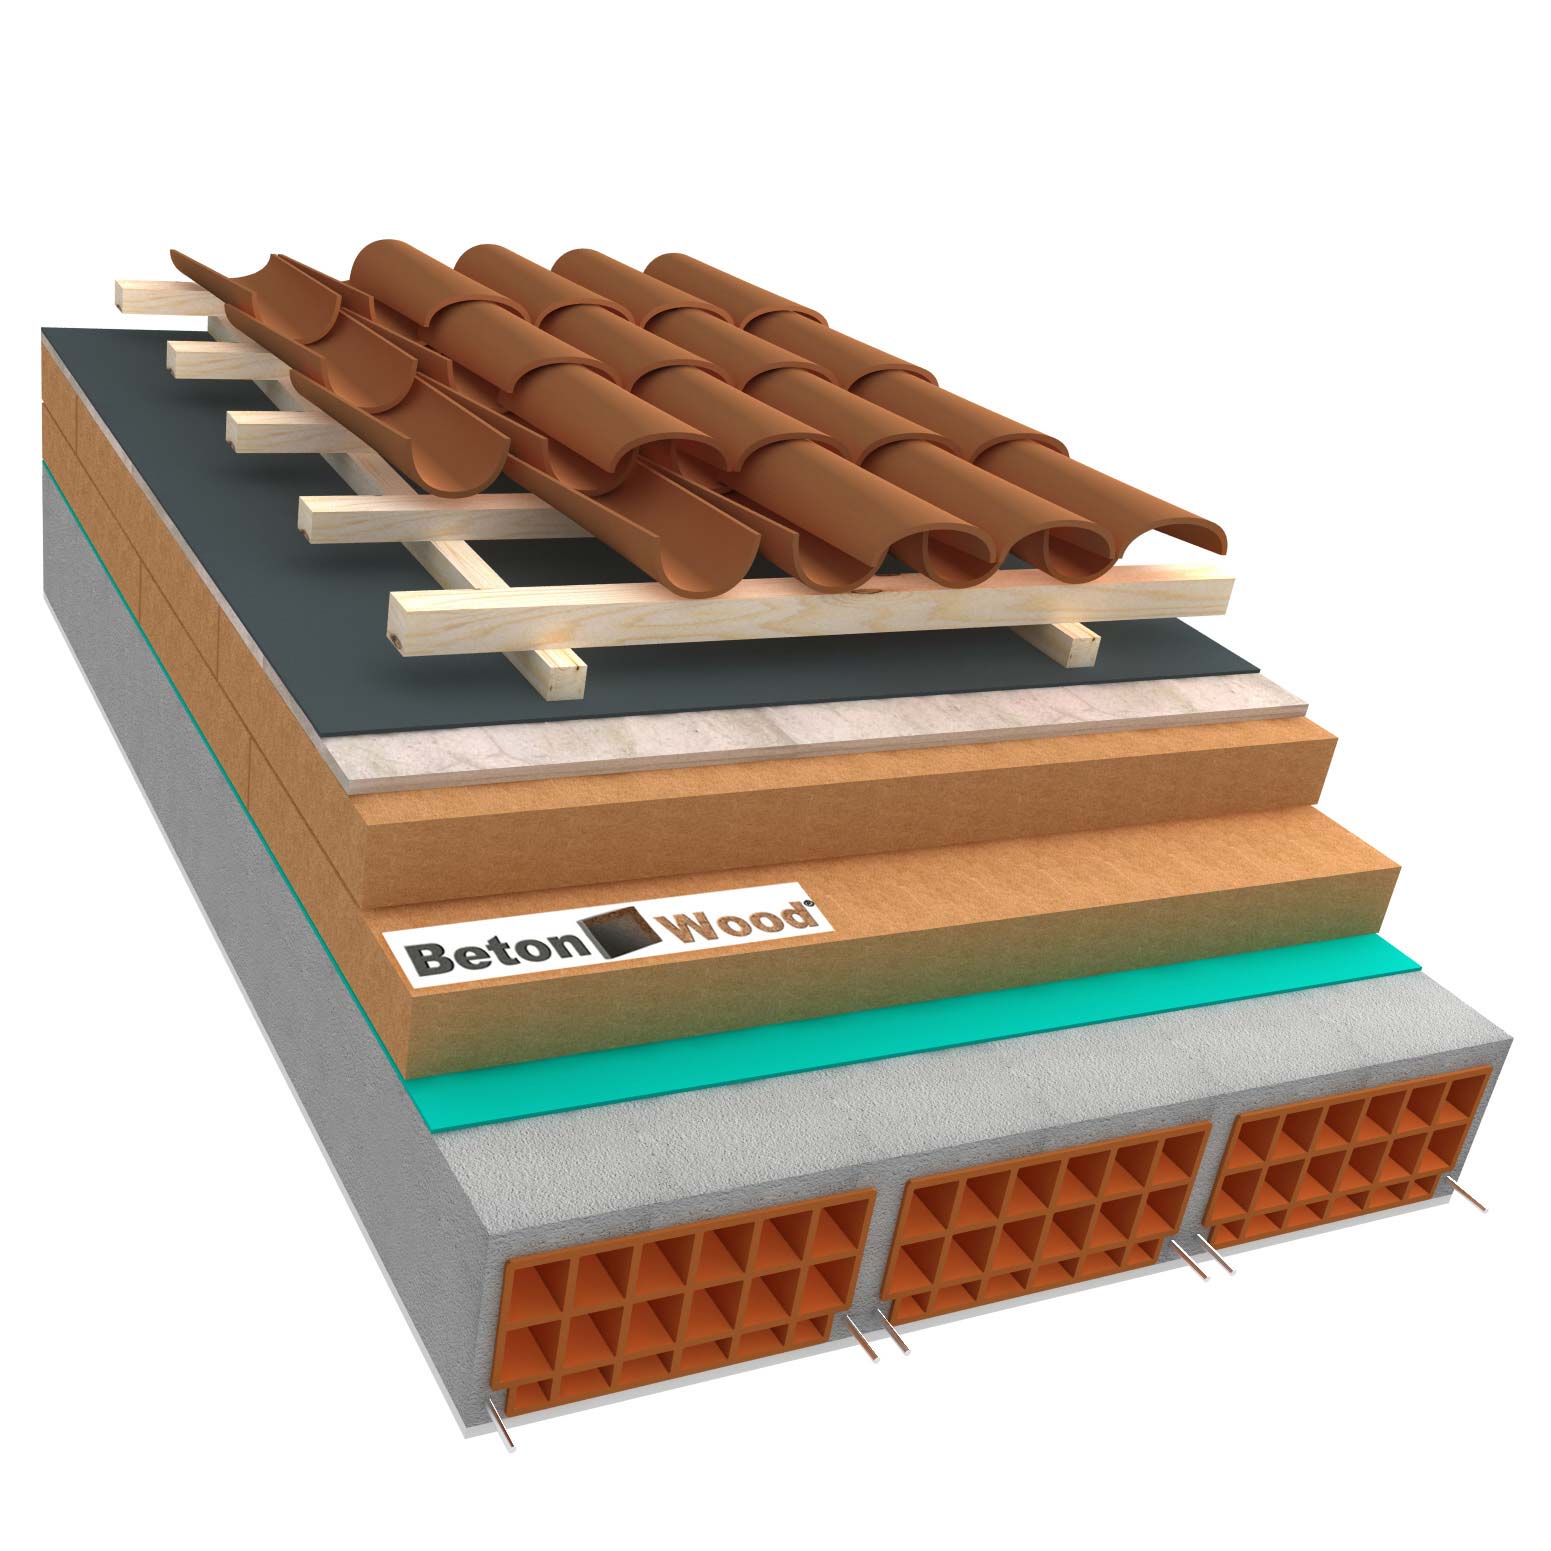 Fiber wood Therm and BetonWood concrete roof